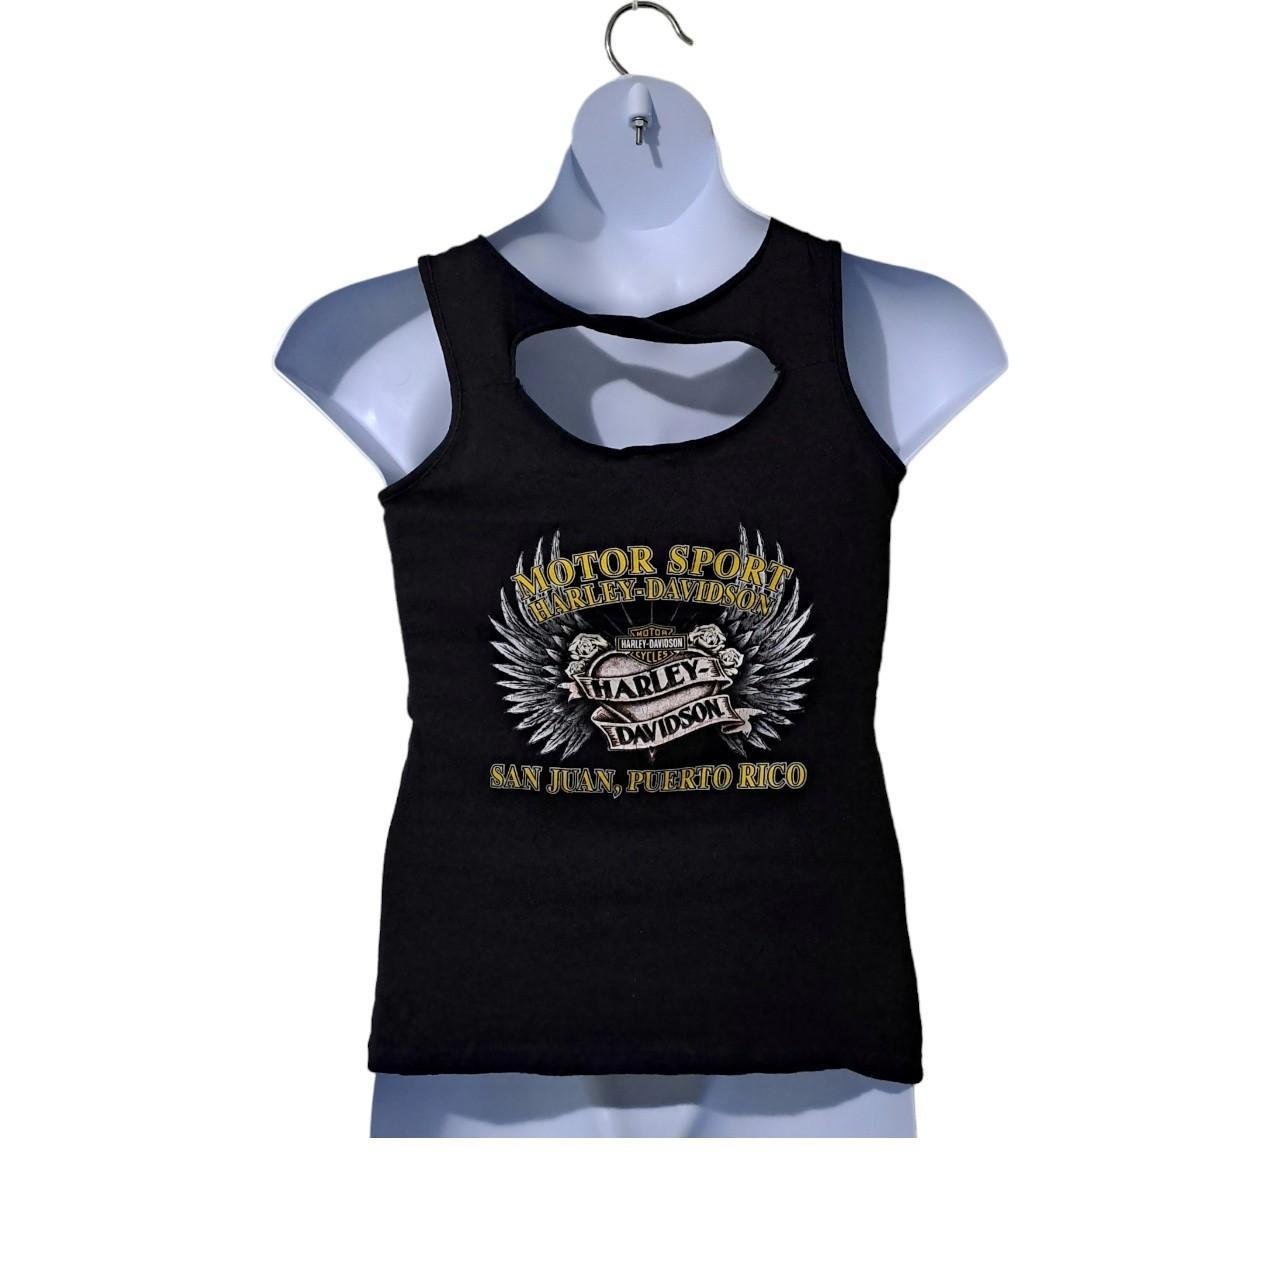 SOLD OUT | Harley Davidson Top